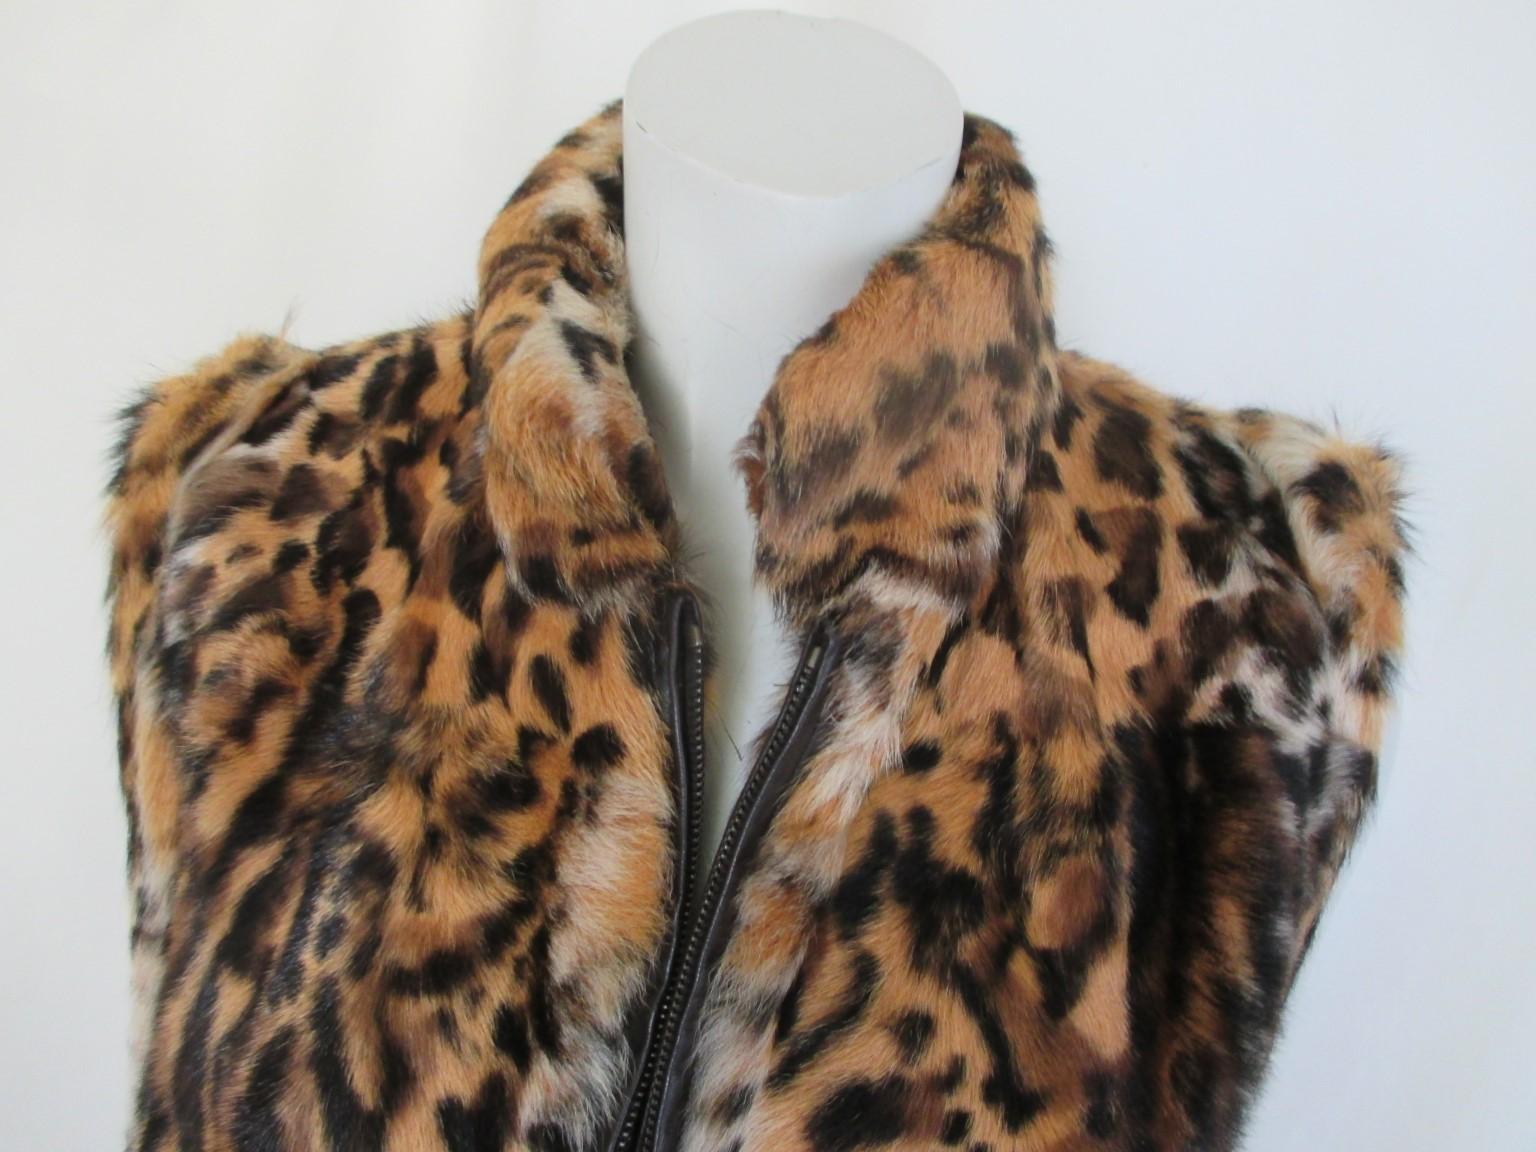 Panther printed Leopard Lapin vintage fur vest

We offer more exclusive fur & vintage couture items, view our front store

Details:
2 pockets, closing zipper, fully lined
Soft fur and very light to wear
Made in Switzerland by Ricky Models
Size is